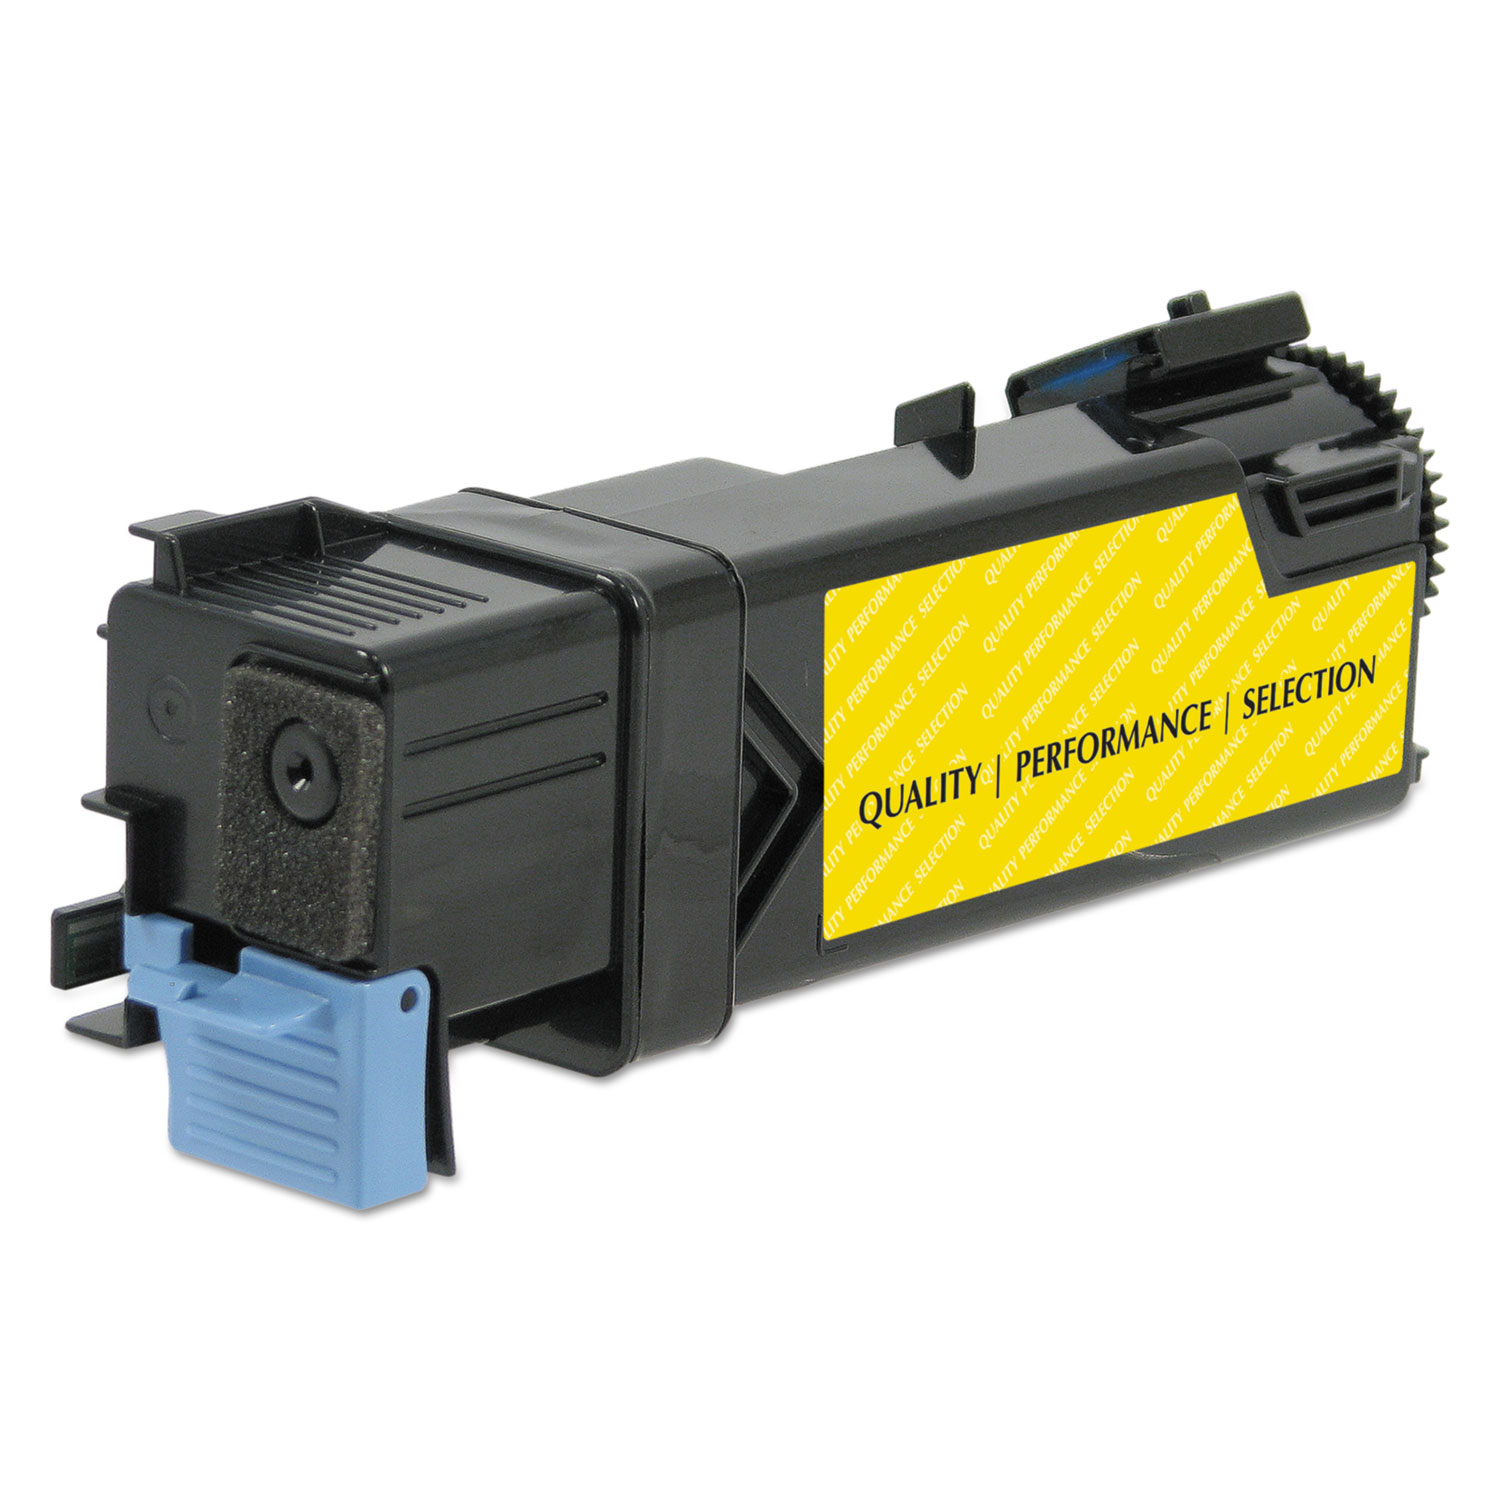  Innovera IVRD2150Y Remanufactured 331-0718 (2150) High-Yield Toner, 2500 Page-Yield, Yellow (IVRD2150Y) 